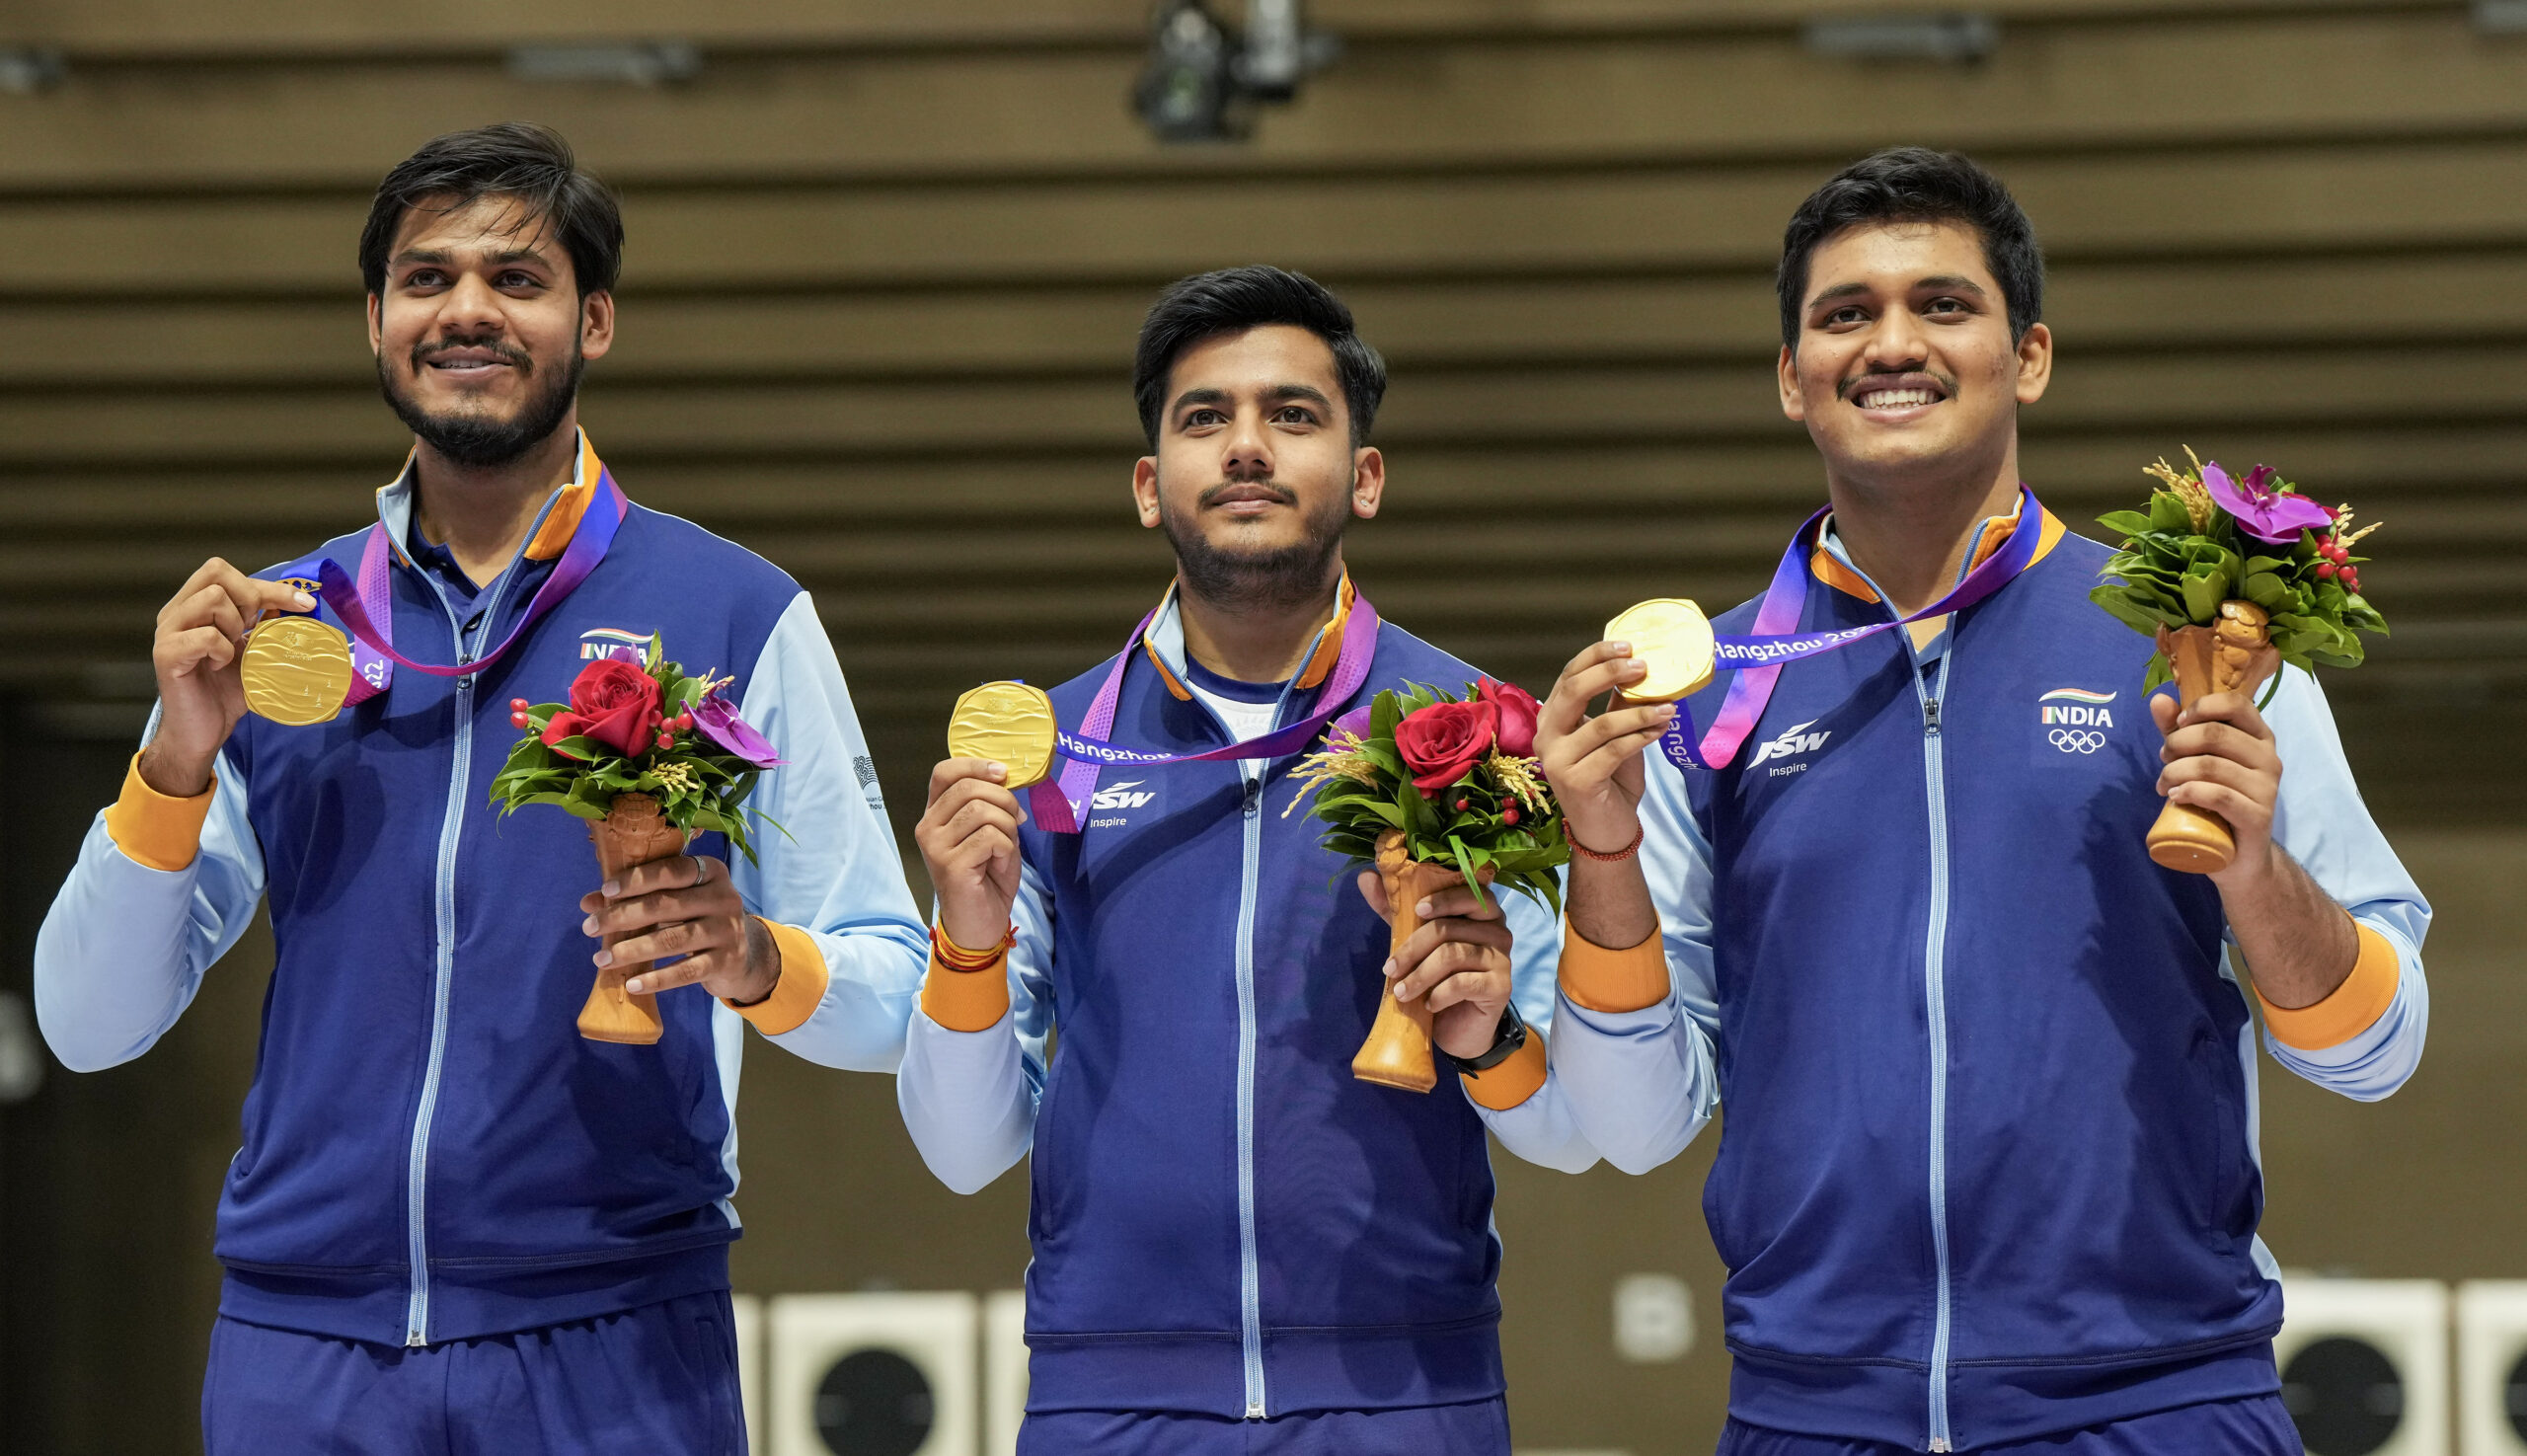 Indian 10m air rifle team clinches gold, Aishwary secures bronze - The Daily Guardian